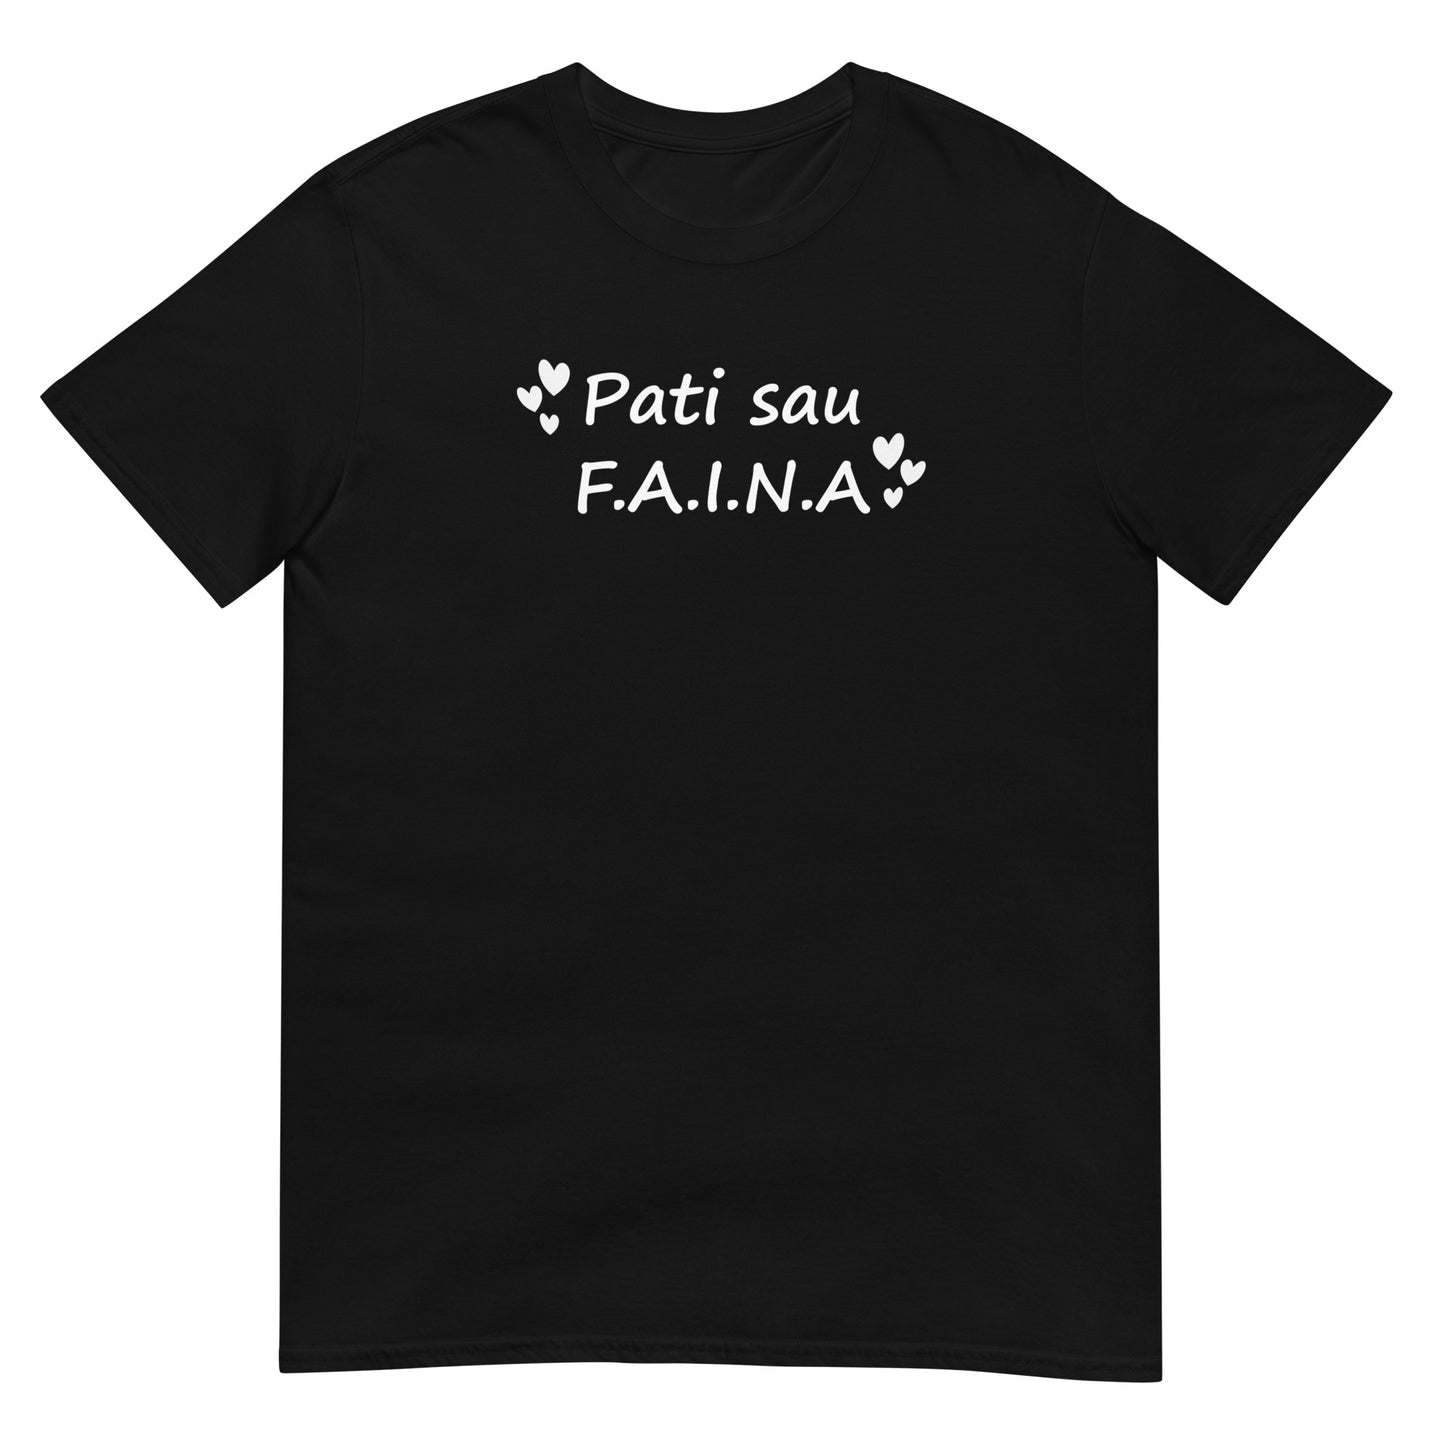 Unisex t-shirt: Fine for yourself